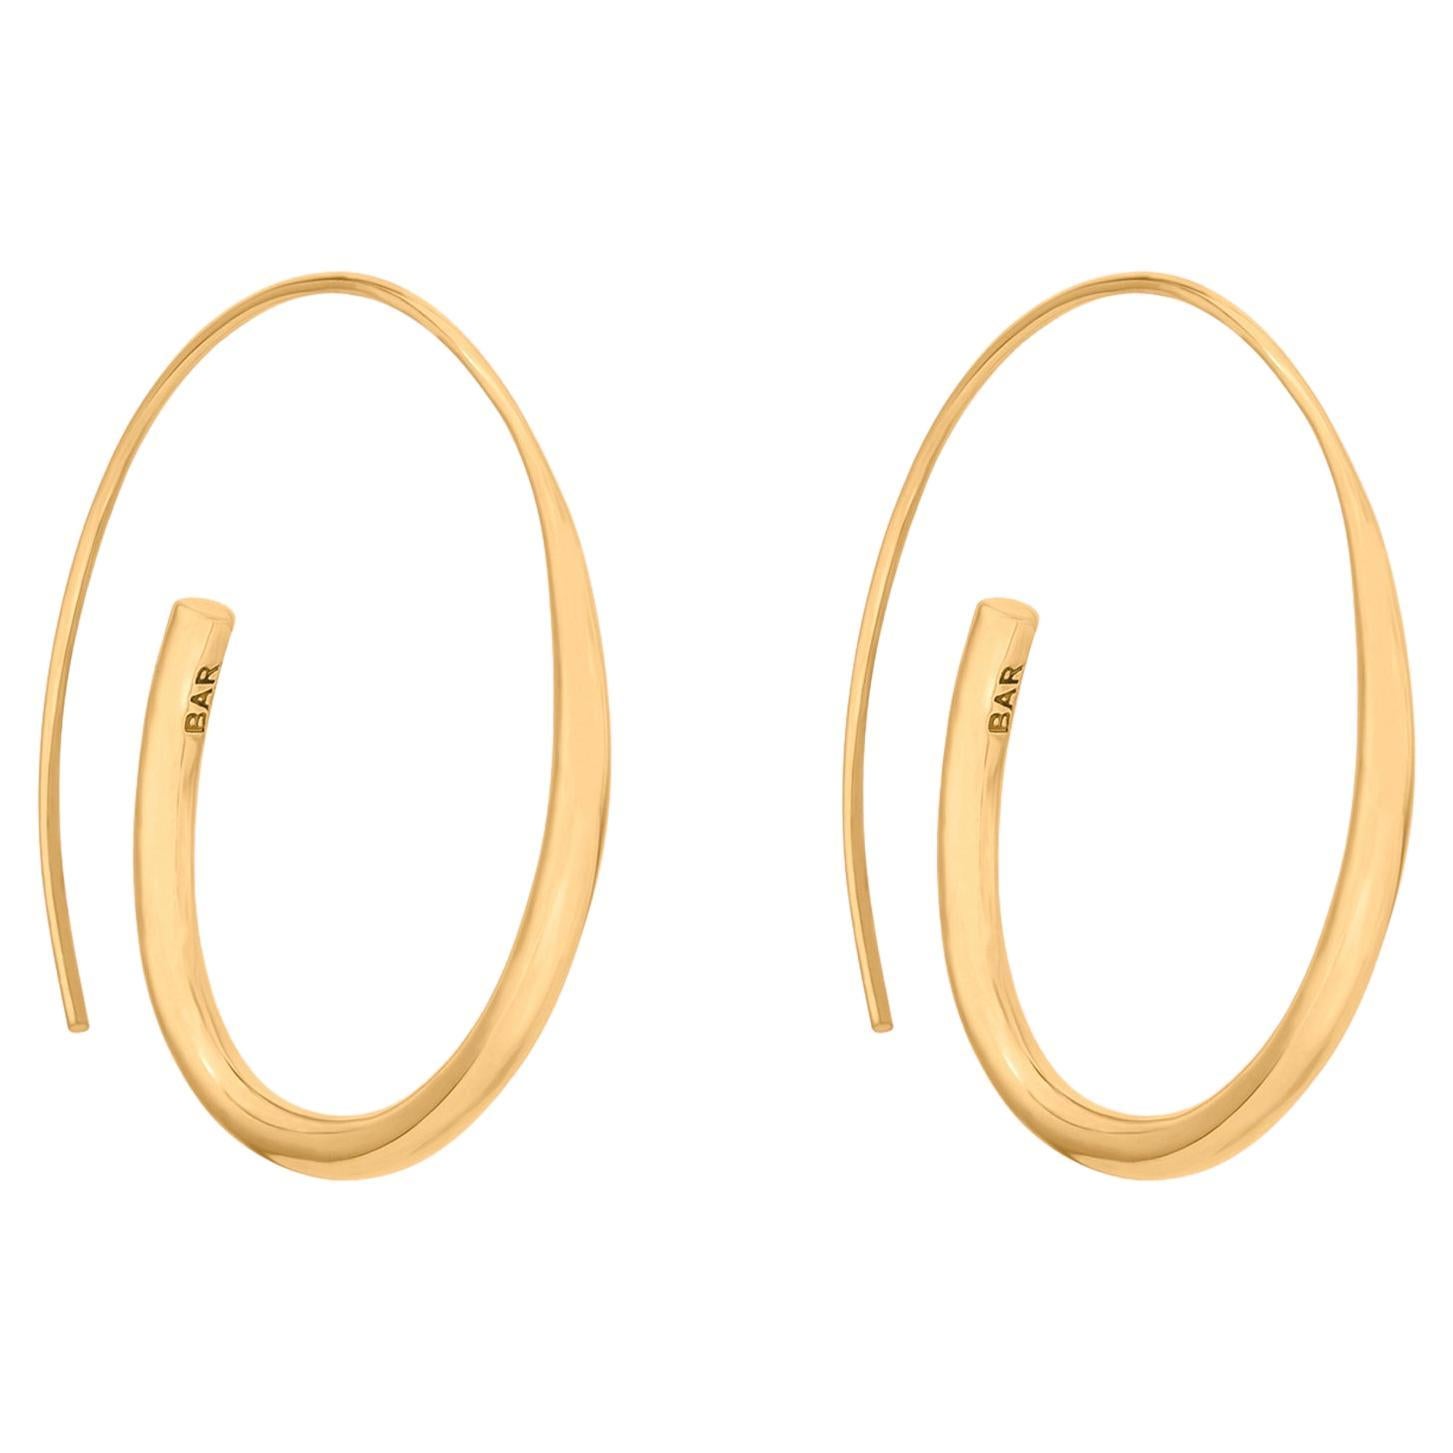 Modernist Open Hoop Earrings, 18 Carat Gold Plated Recycled Silver  For Sale